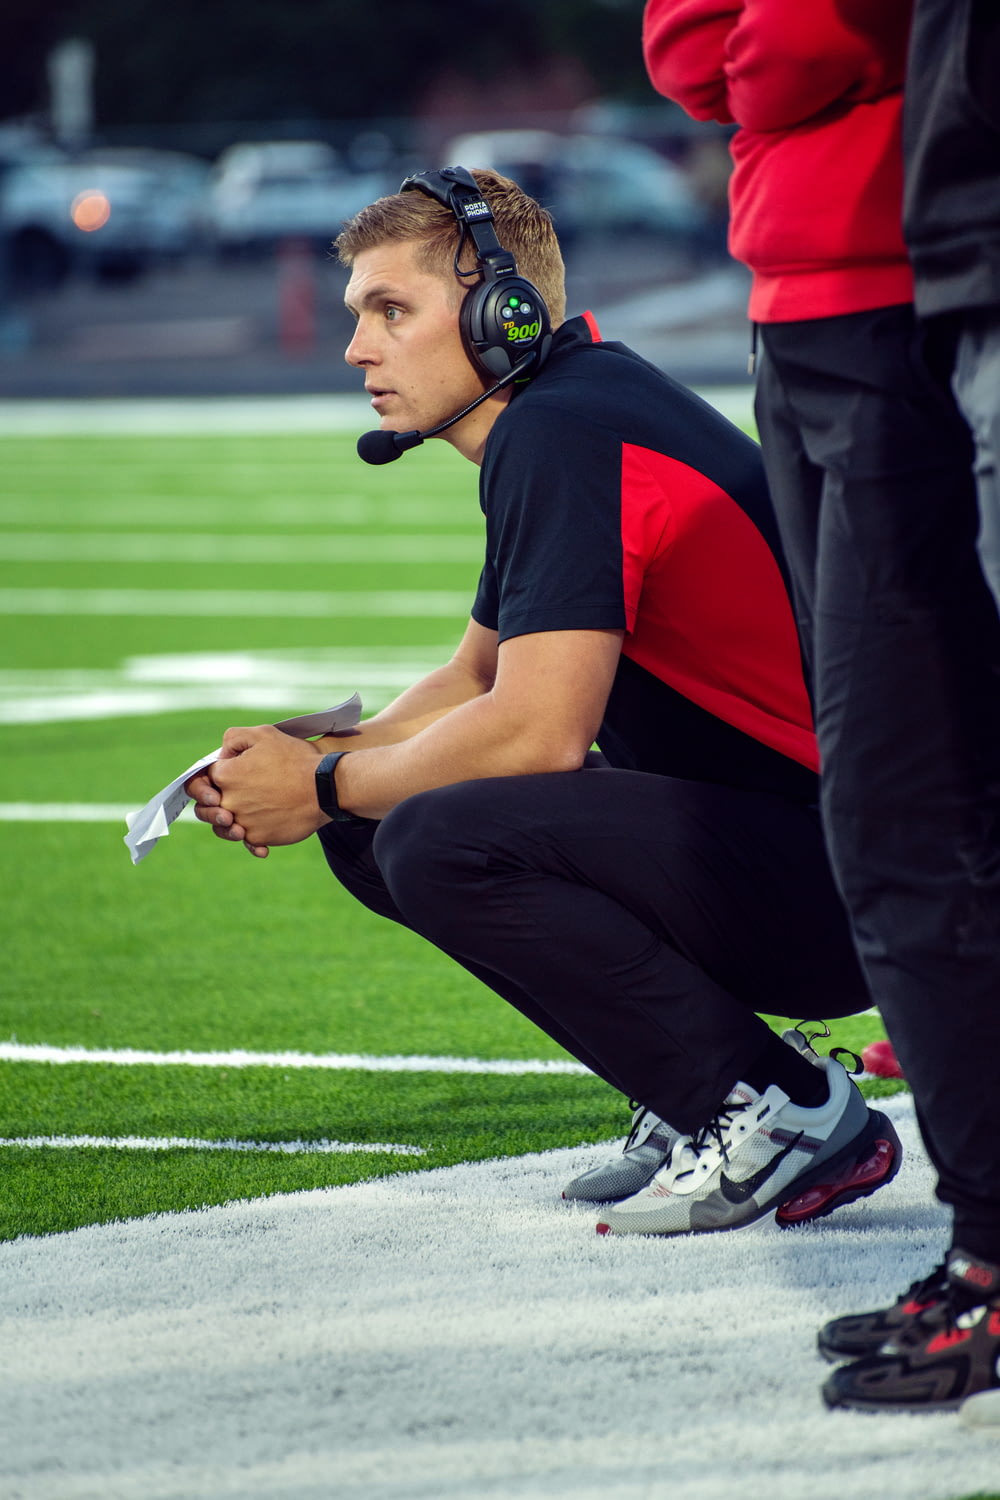 a person wearing headphones and kneeling on a football field